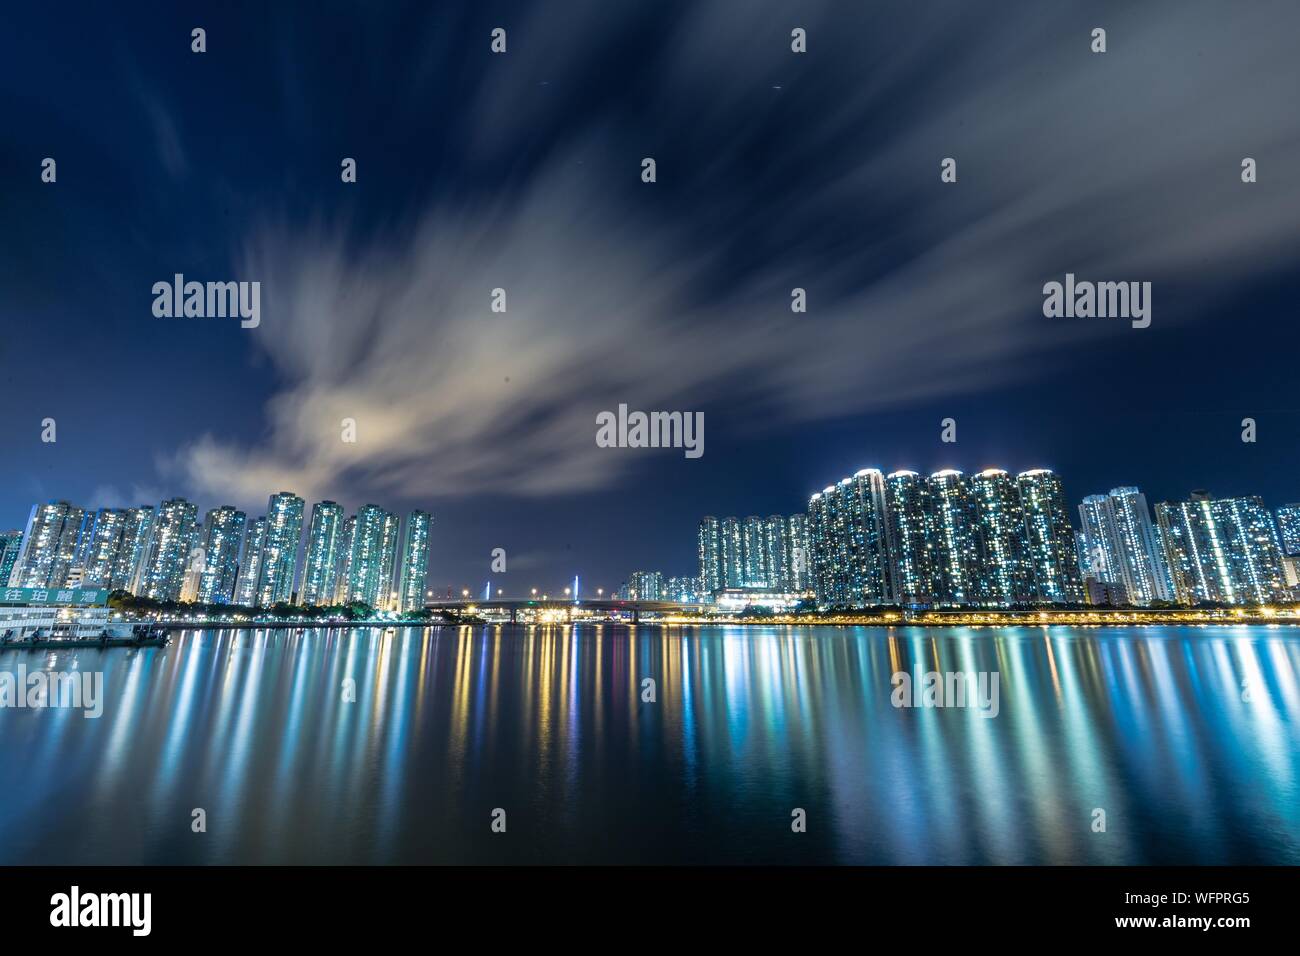 Buildings With Sea Reflection At Night Stock Photo